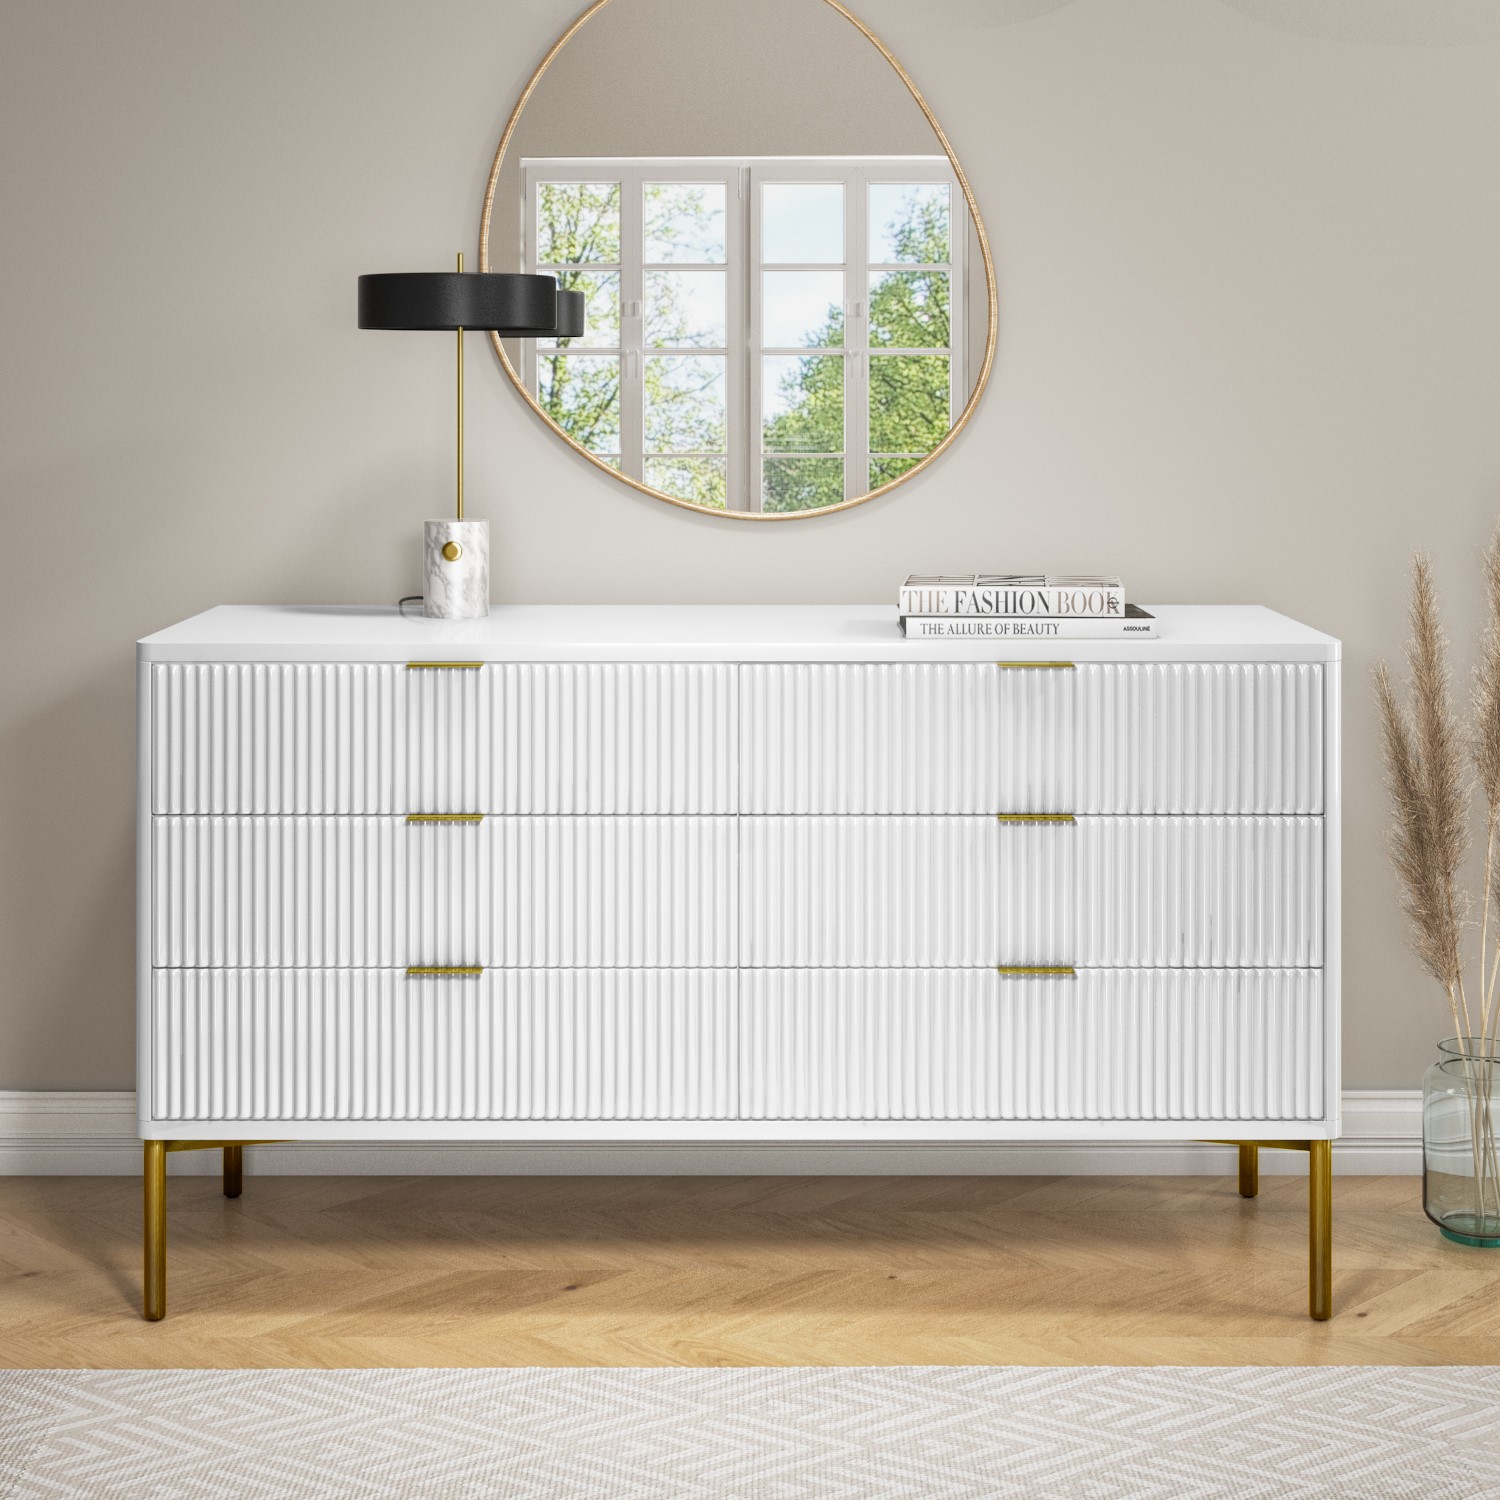 Carcass in White matt/Front in White High Gloss Calypso with a milled 3D Structure and frames in White High Gloss Vladon Cabinet Chest of Drawers Valencia 